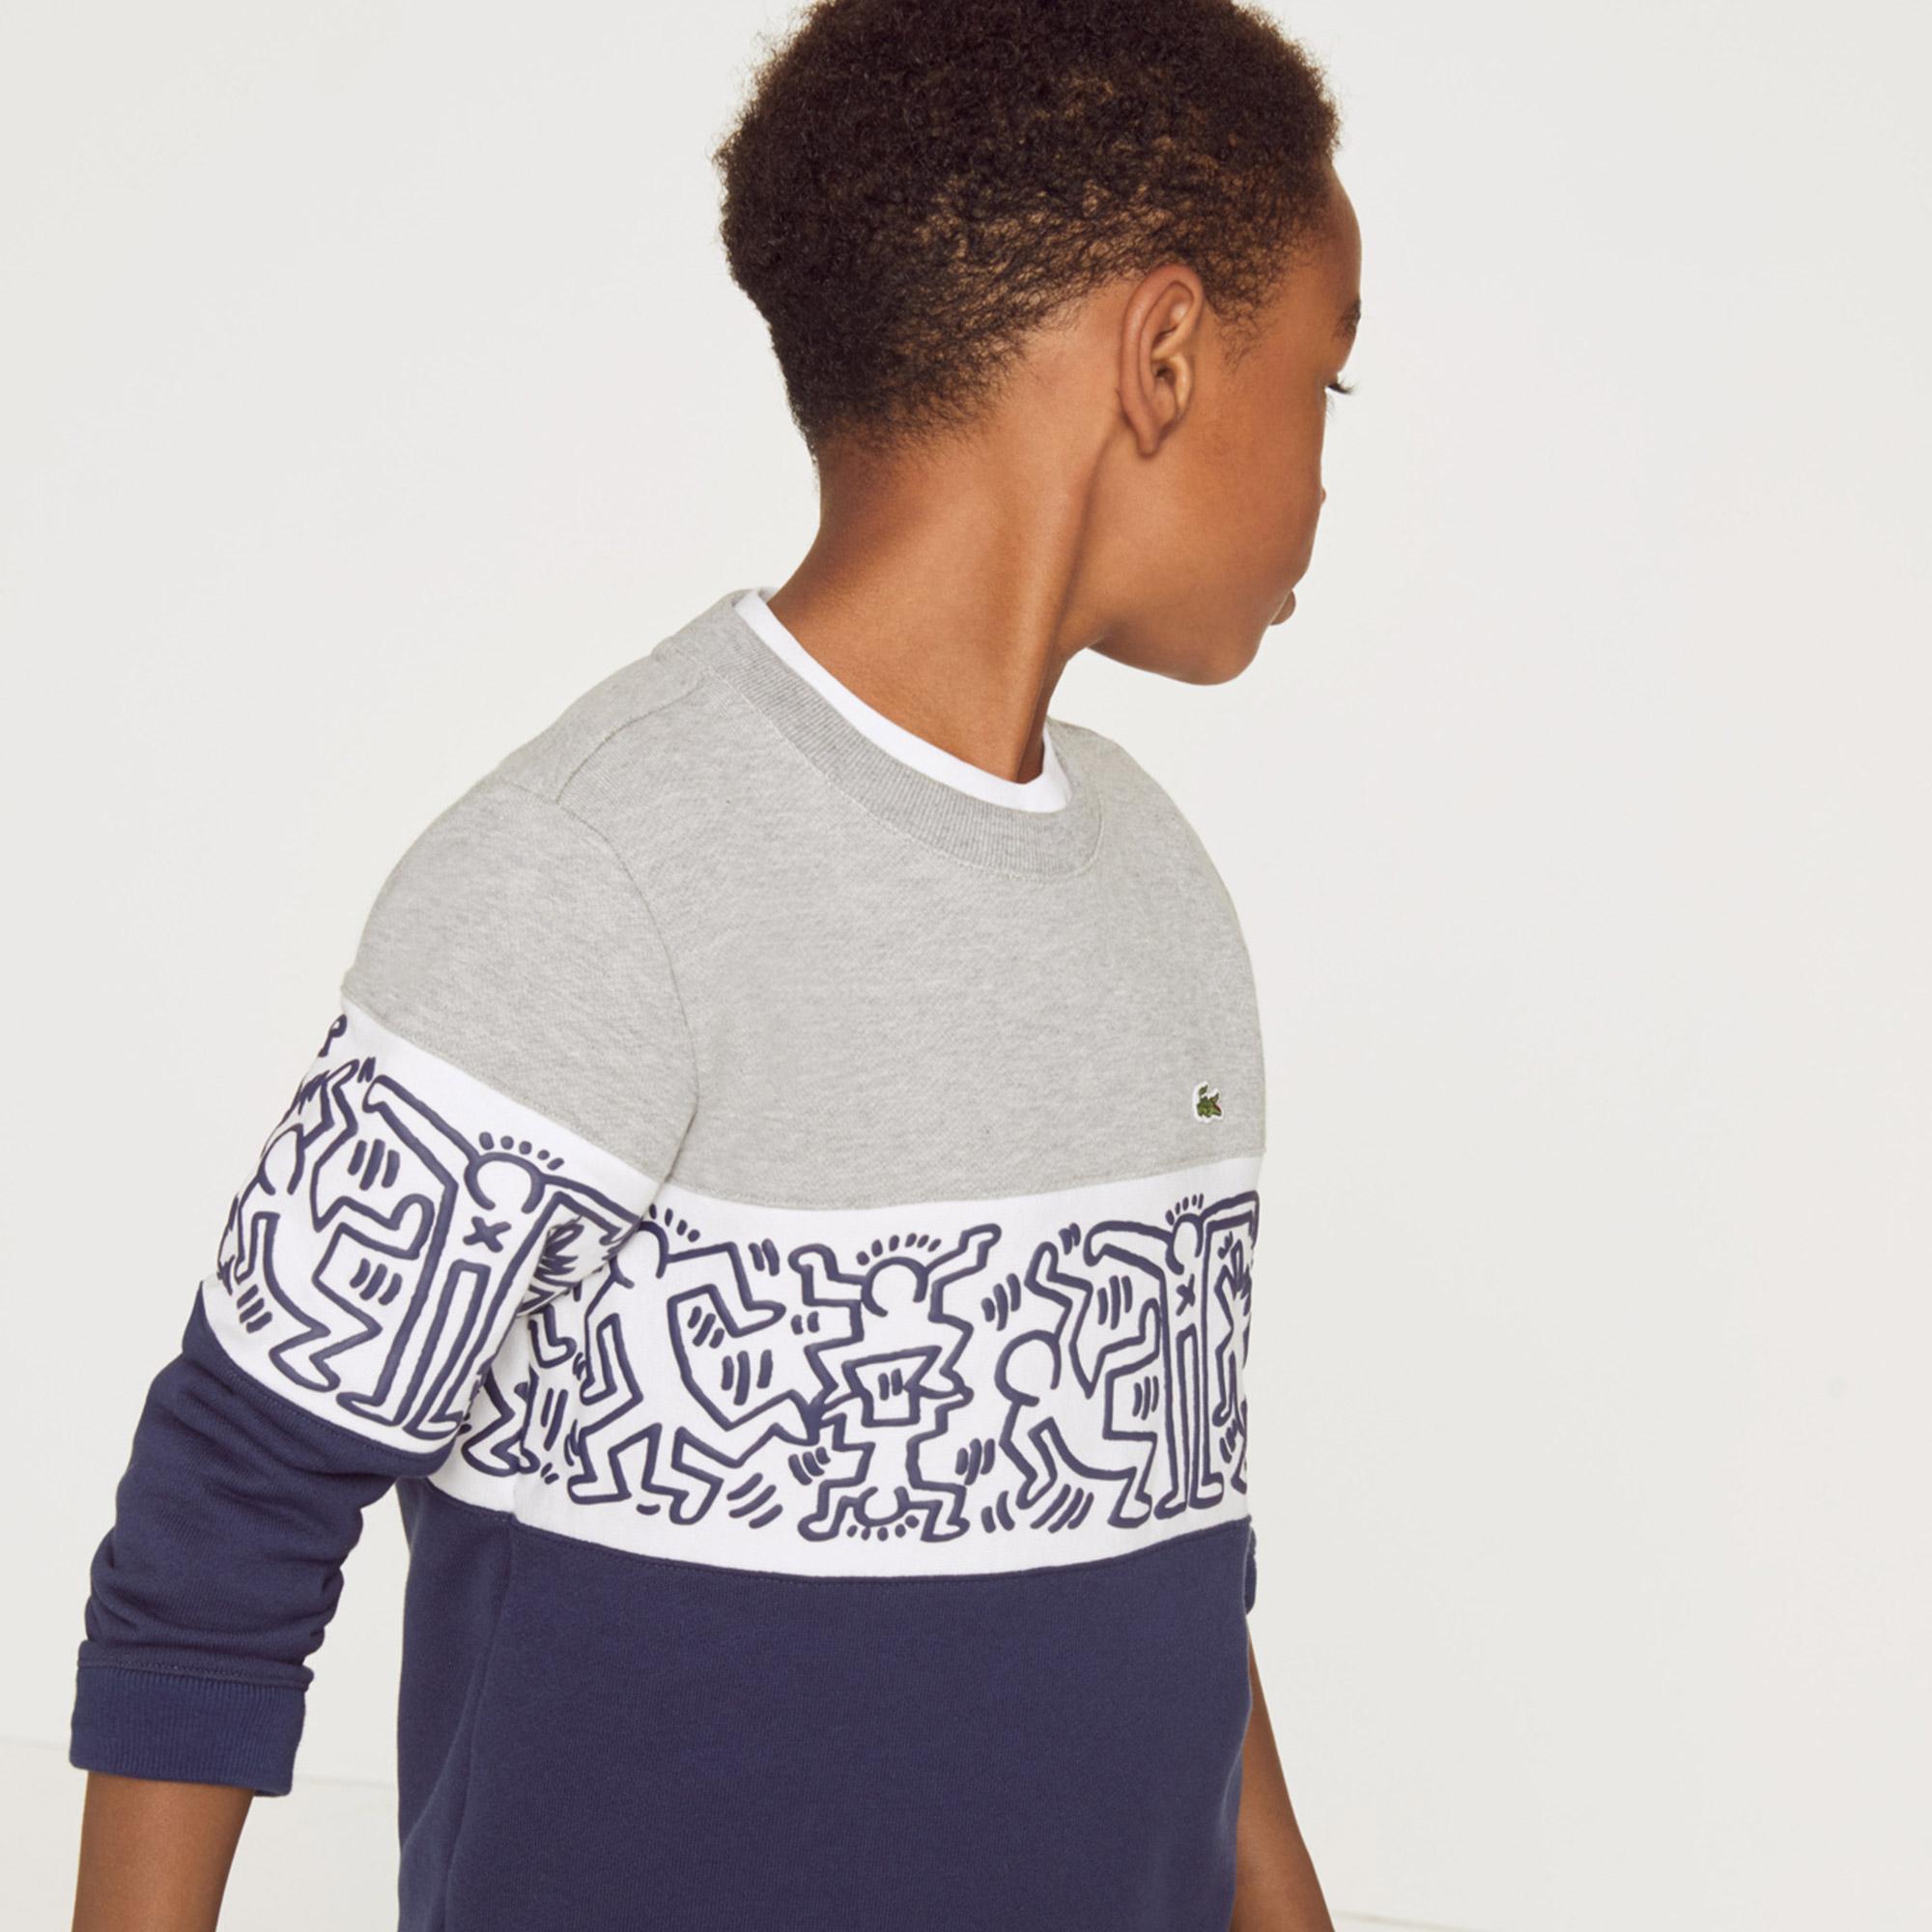 lacoste keith haring sweater